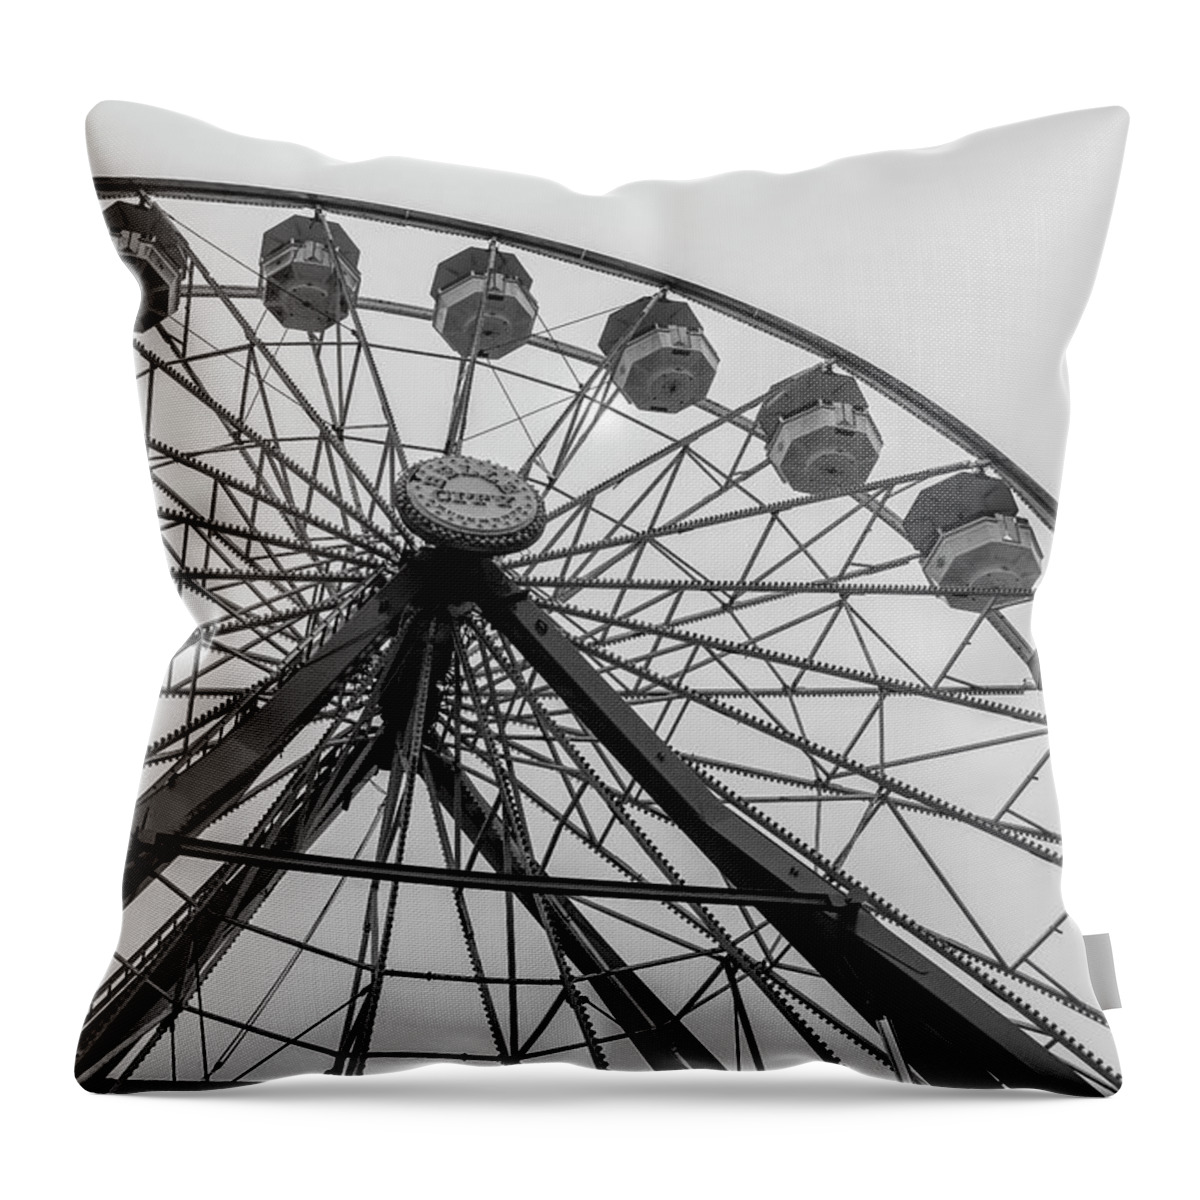 Photo For Sale Throw Pillow featuring the photograph Goin' Round by Robert Wilder Jr